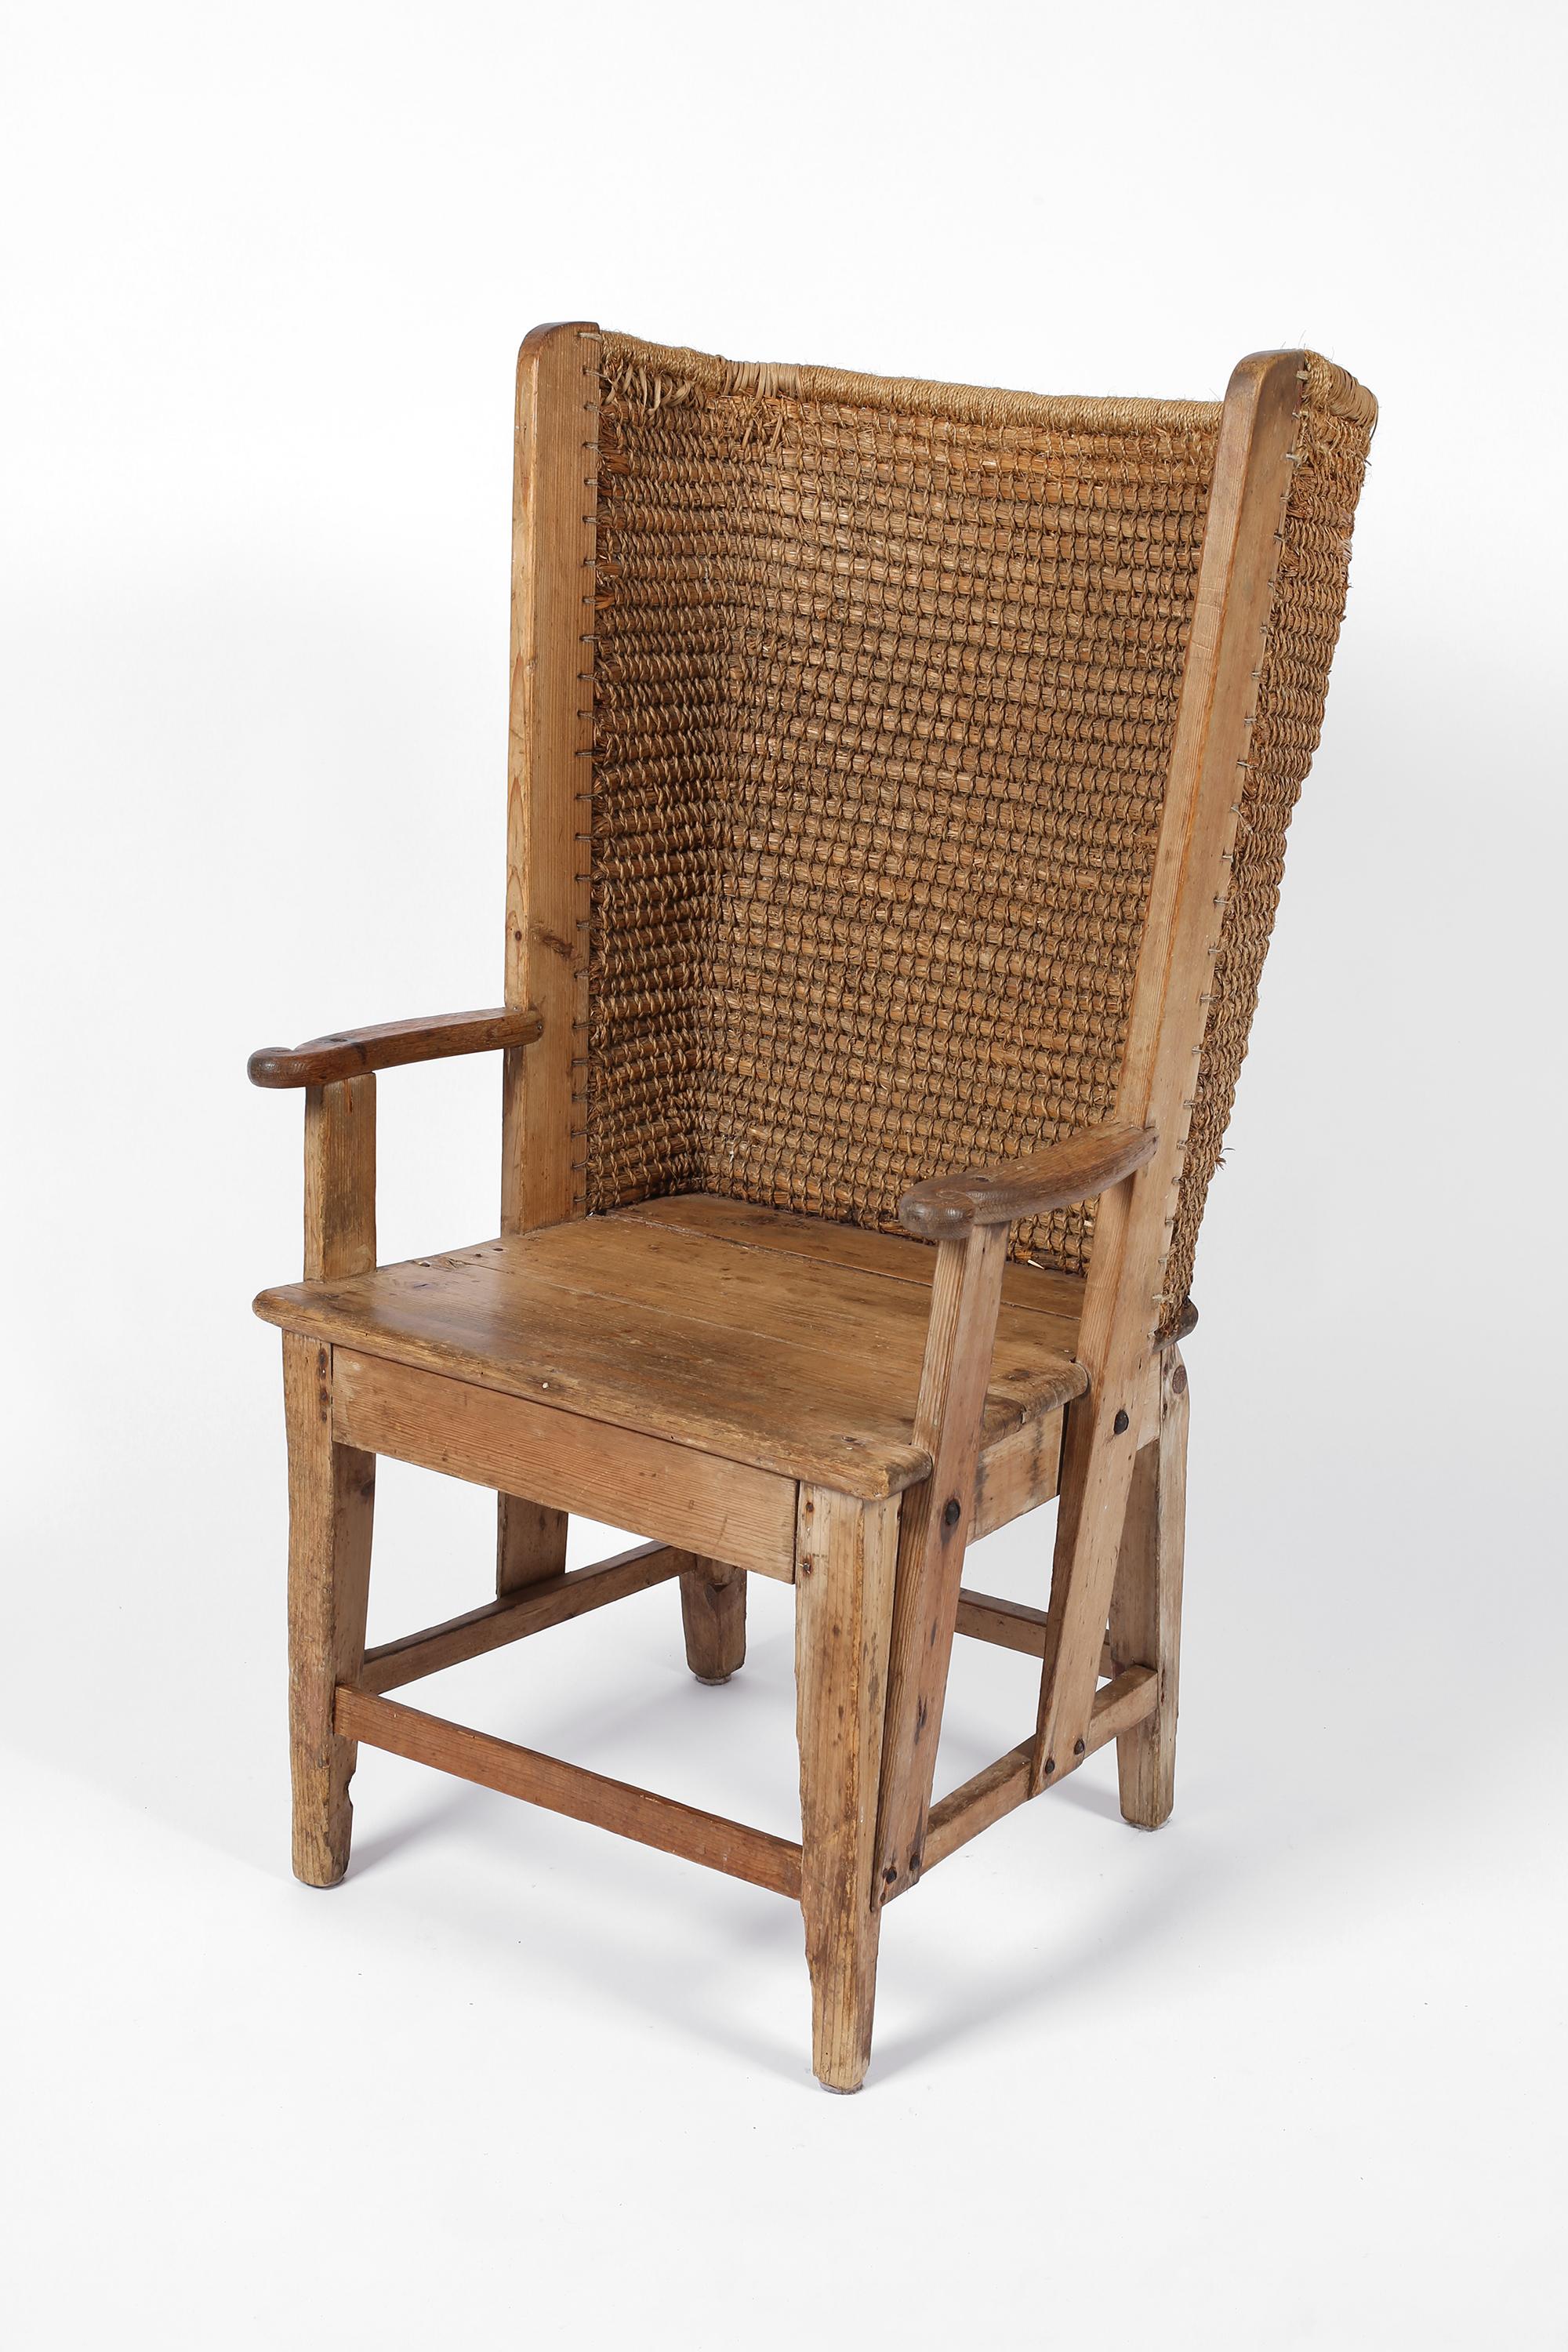 An excellent example of a late 19th century Orkney chair in natural pine, oat straw and sisal twine. A beautifully patinated vernacular piece originating from the Orkney archipelago, off the northwestern coast of Scotland. A craft dating back